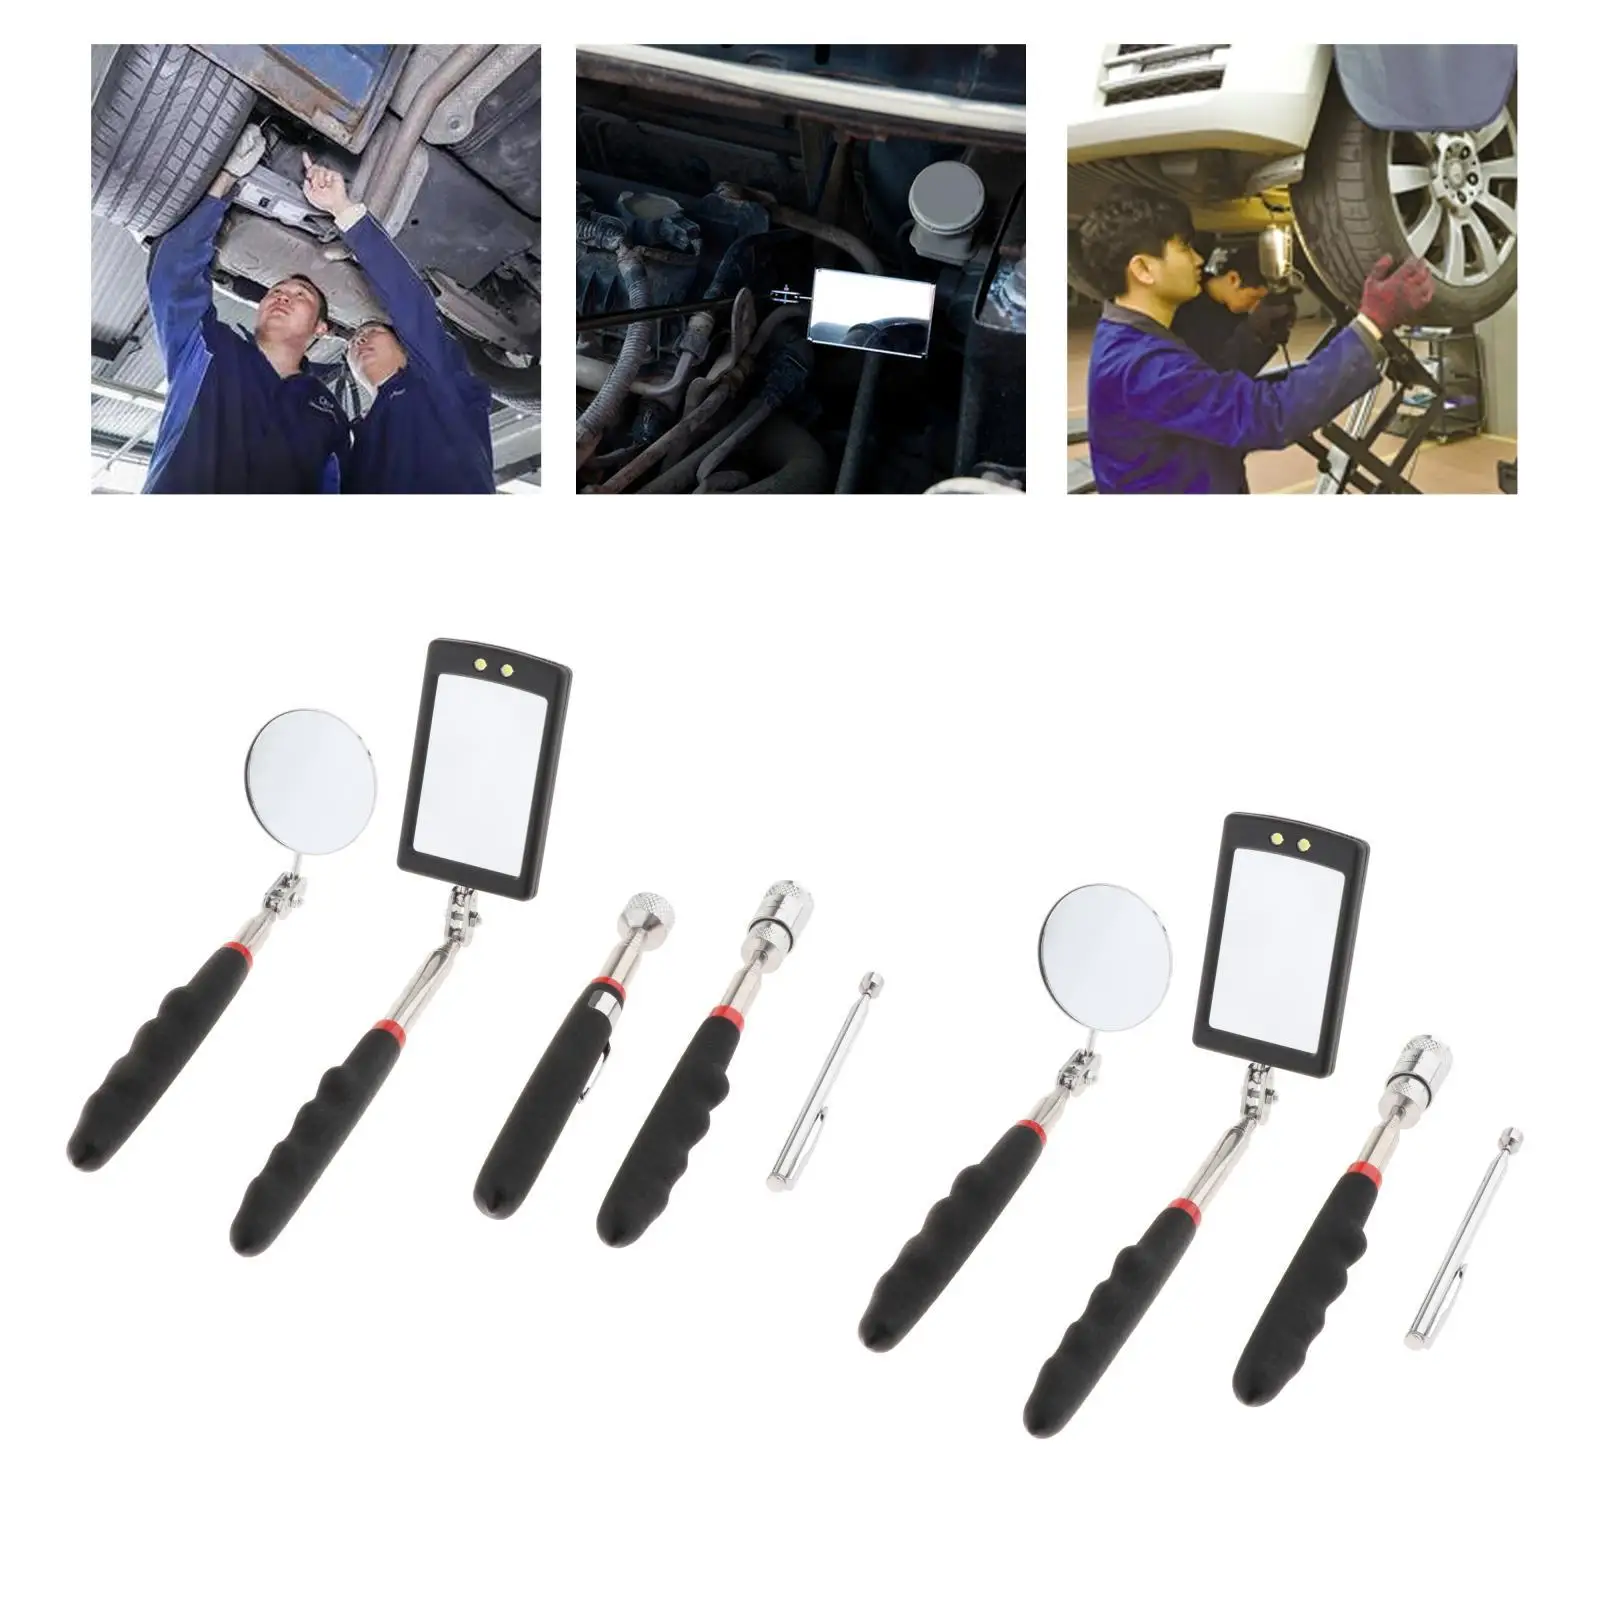  Telescoping Pick Tool Kit Retractable Fit for Car Maintenance